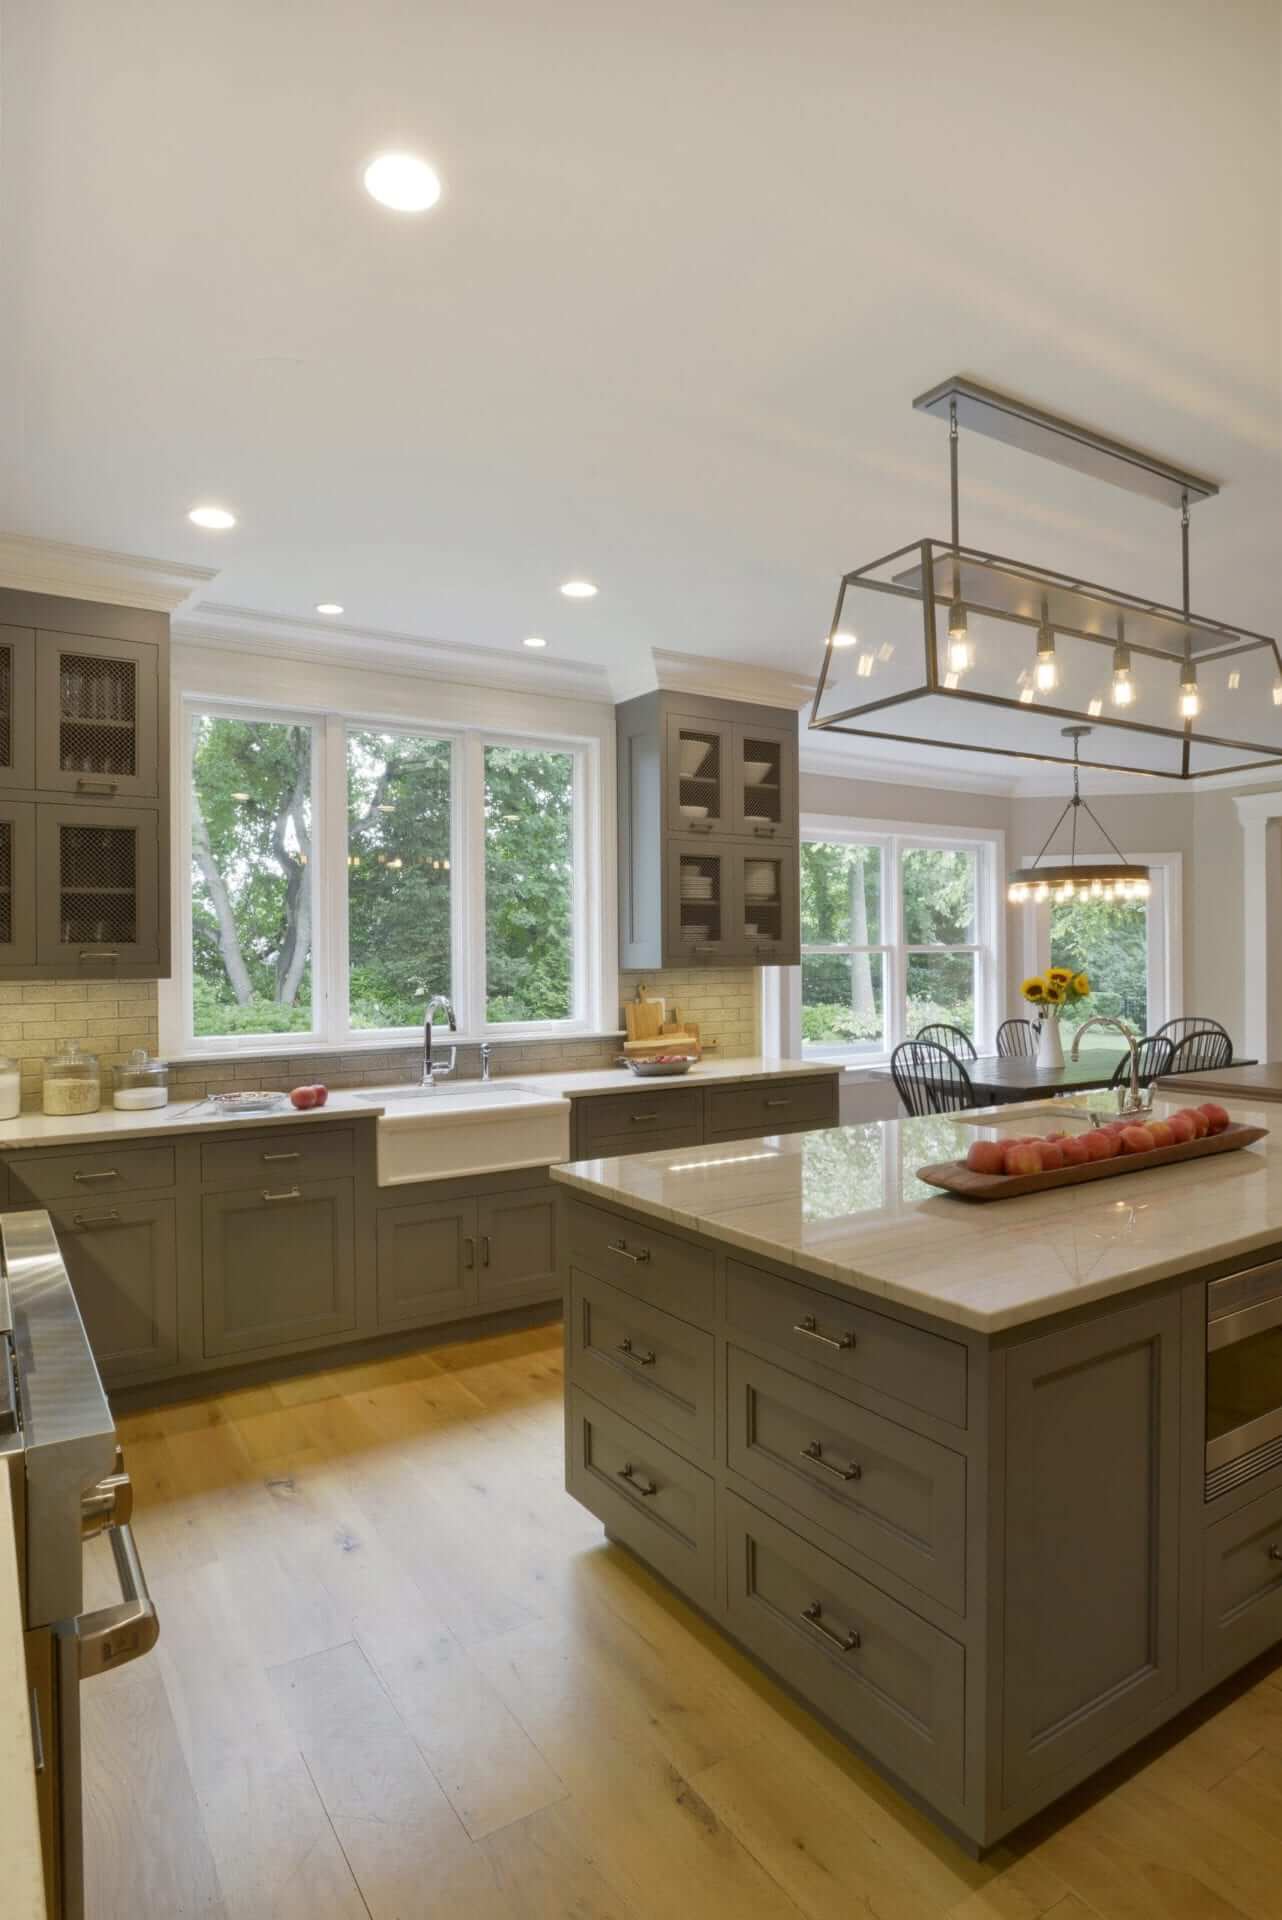 White Macambas Caesarstone topped grey Bilotta island is central in this Country kitchen